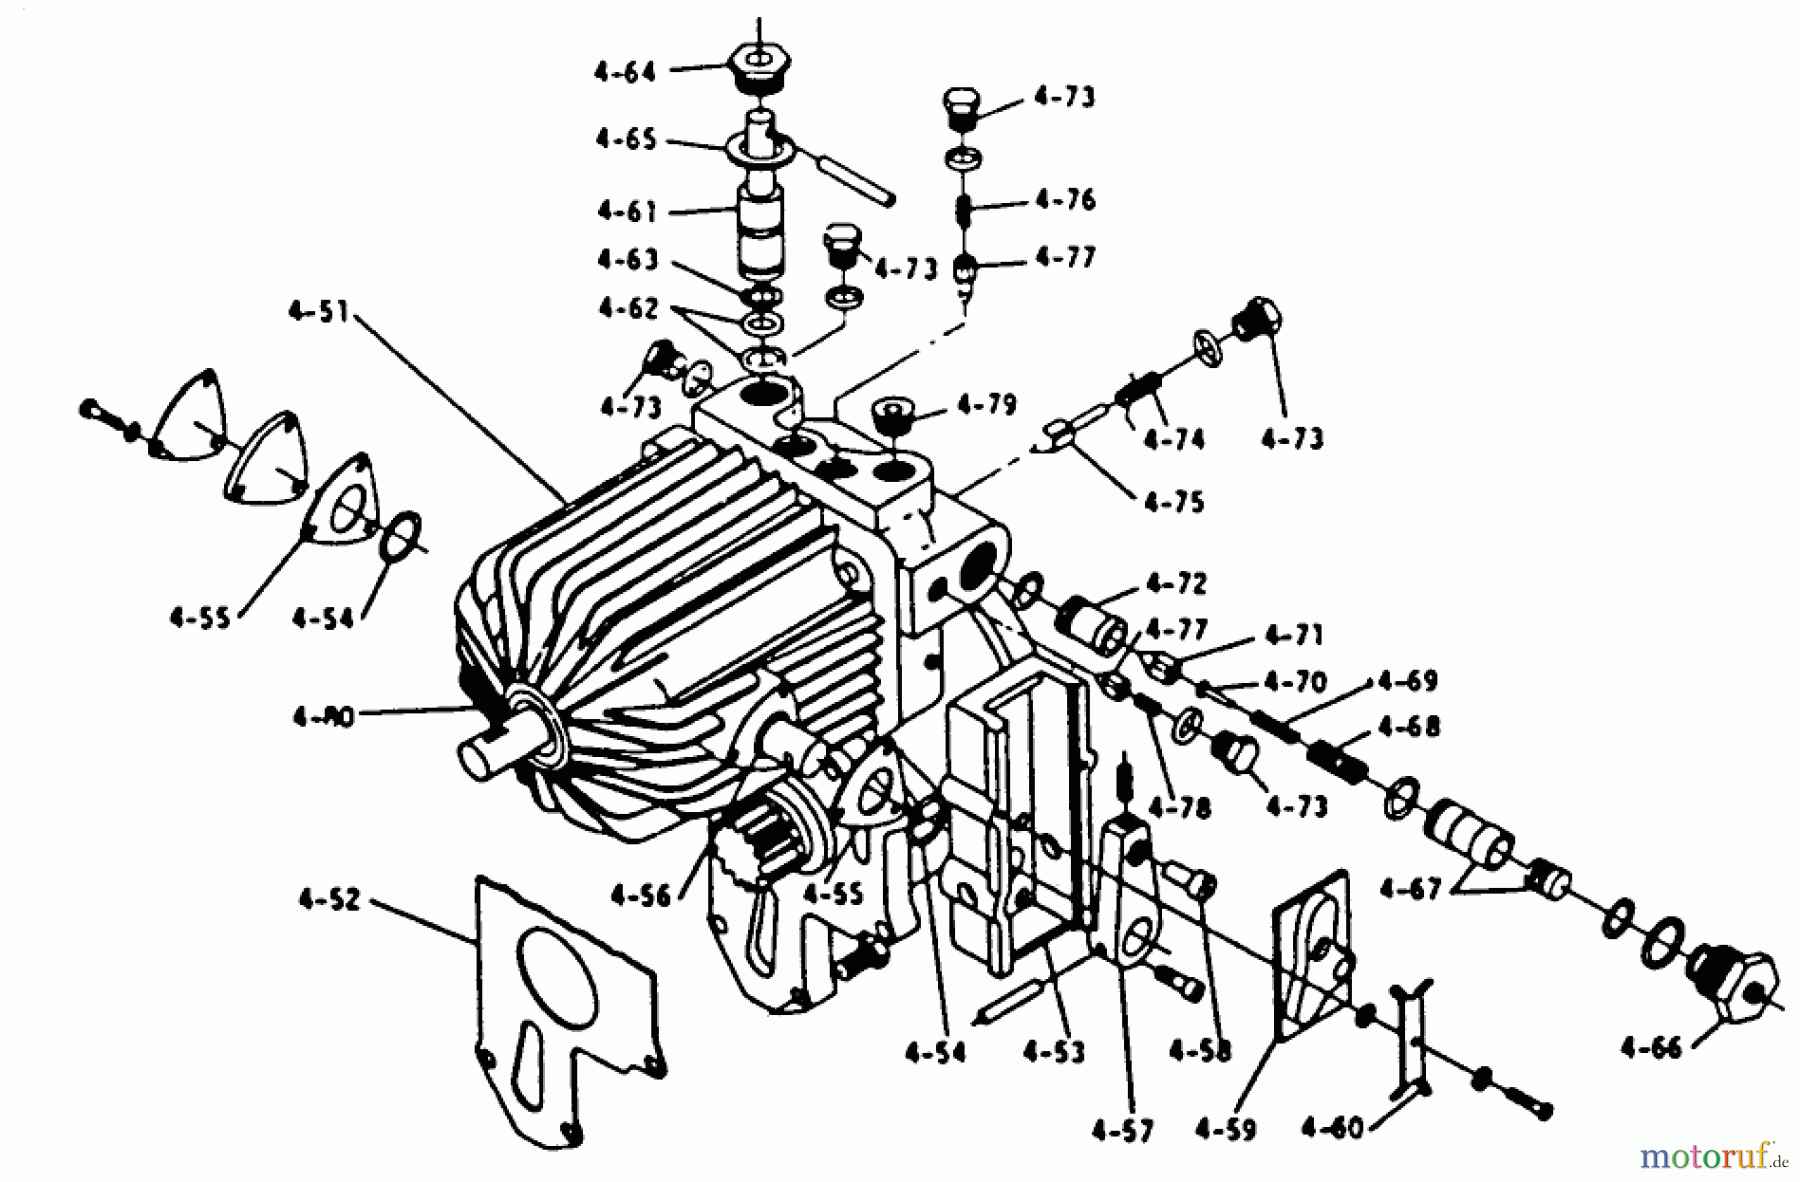  Toro Neu Mowers, Lawn & Garden Tractor Seite 1 1-0465 - Toro 12 hp Automatic Tractor, 1973 PARTS LIST FOR 4.050 HYDROGEAR (PLATE 4.4)